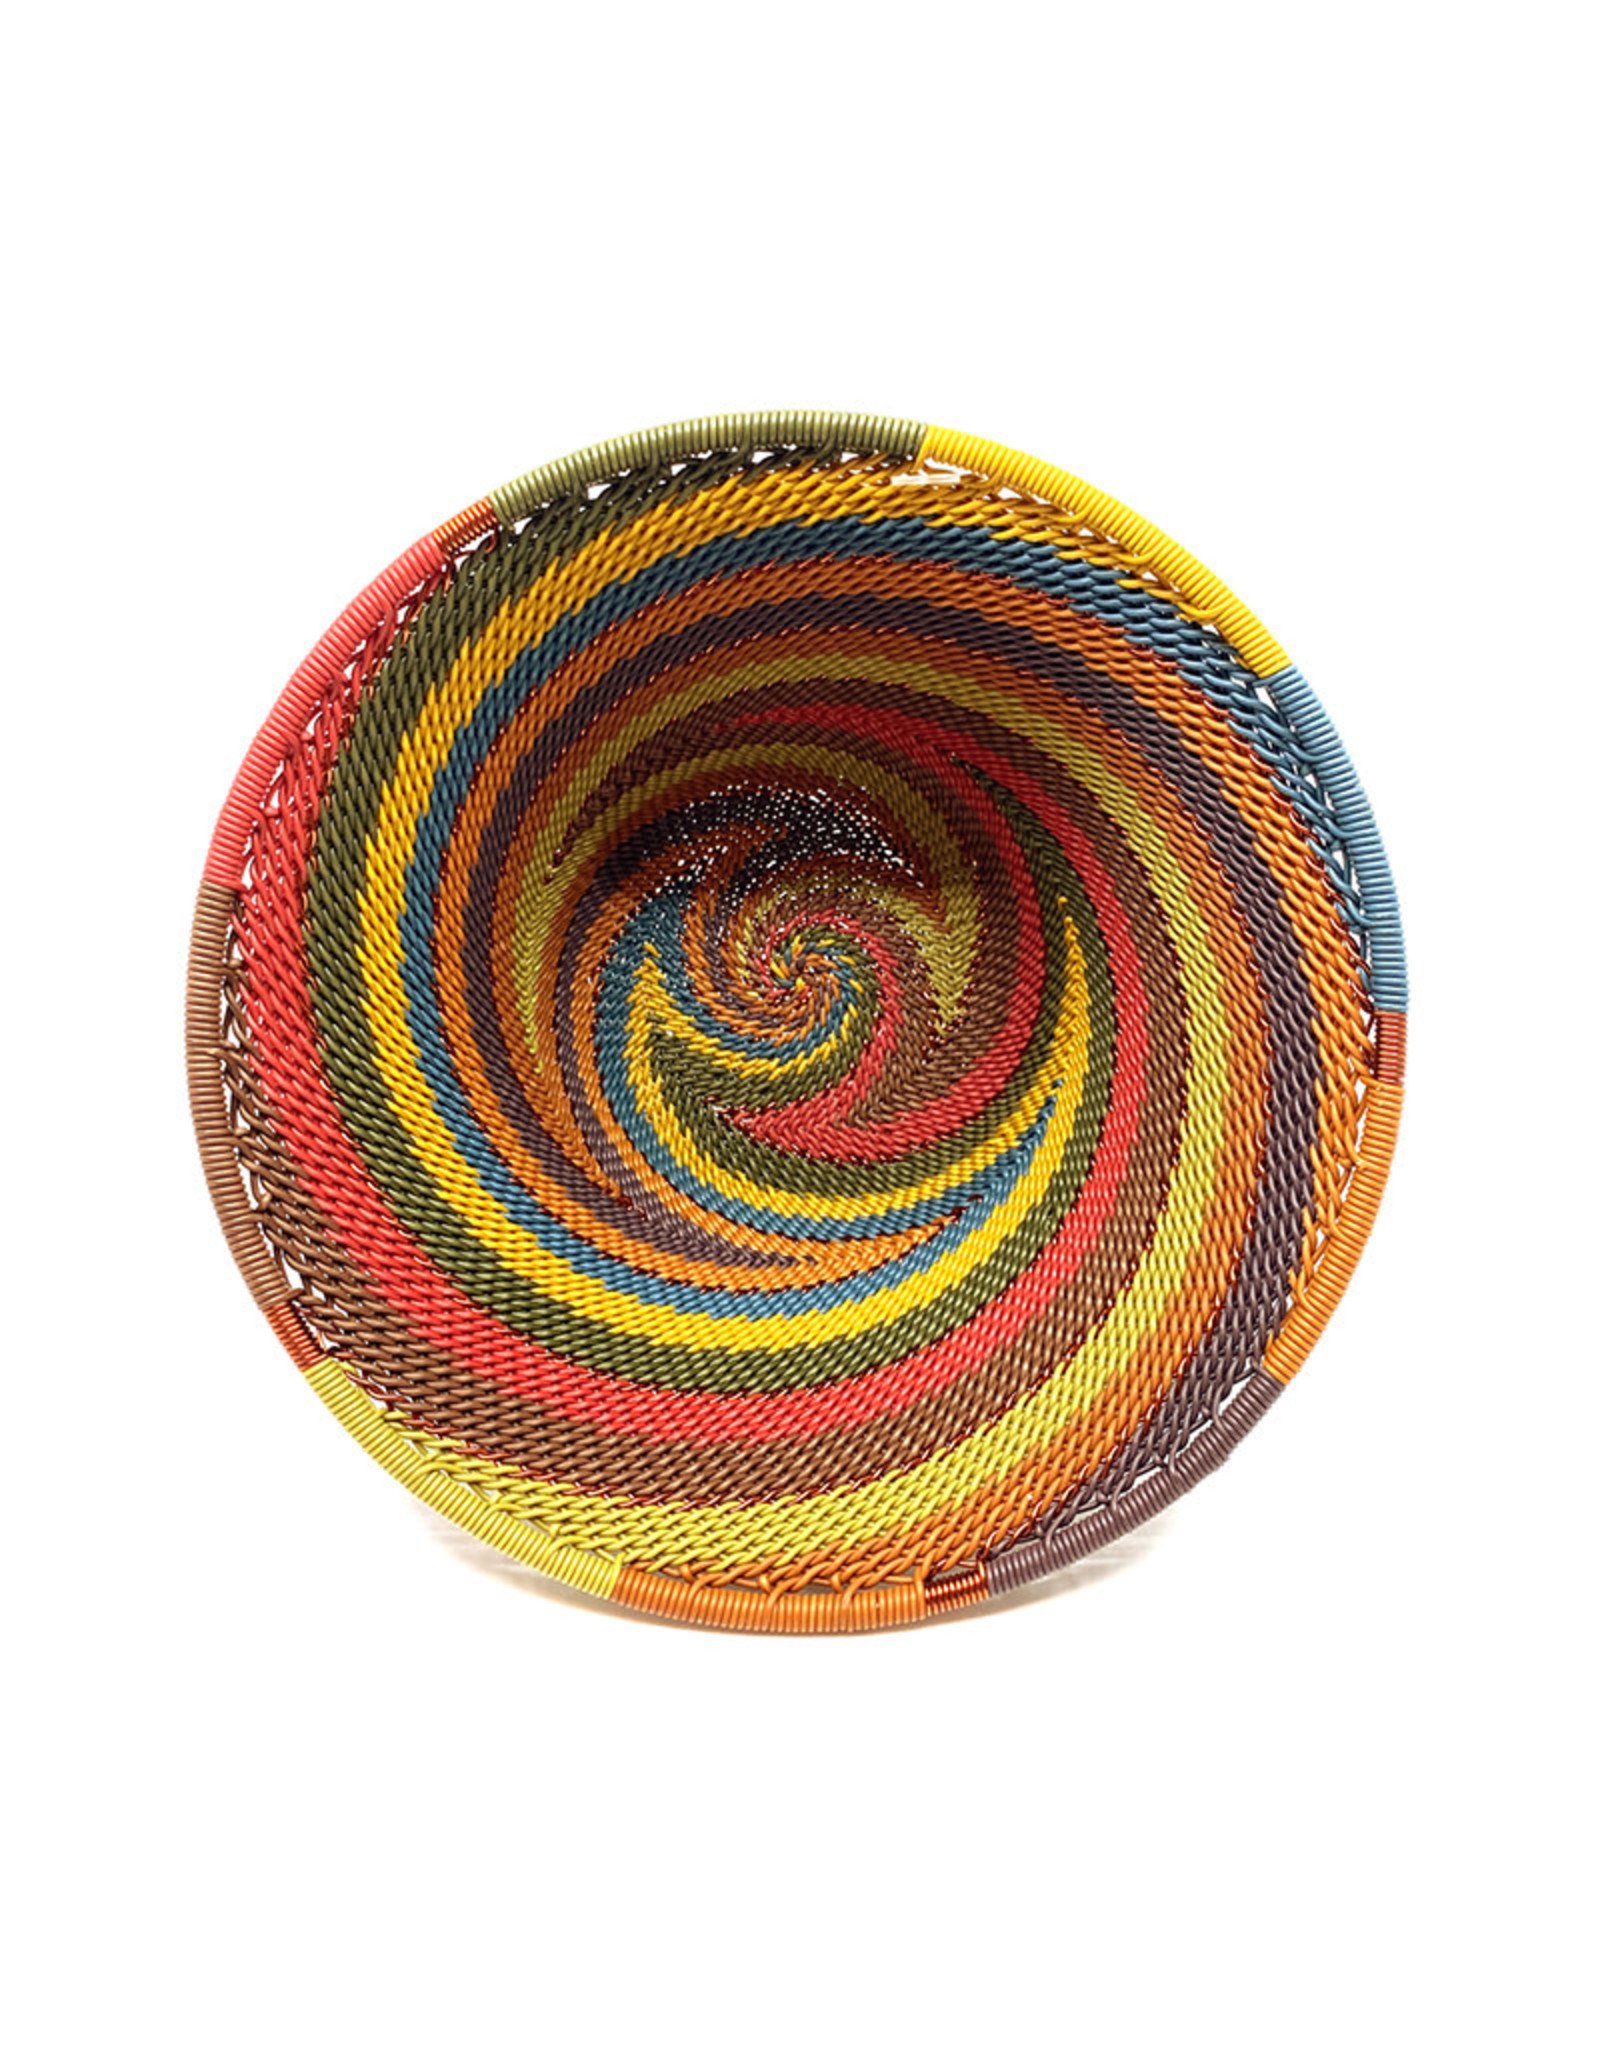 BASKETS OF AFRICA SMALL EARTH RAINBOW FUNNEL BASKET